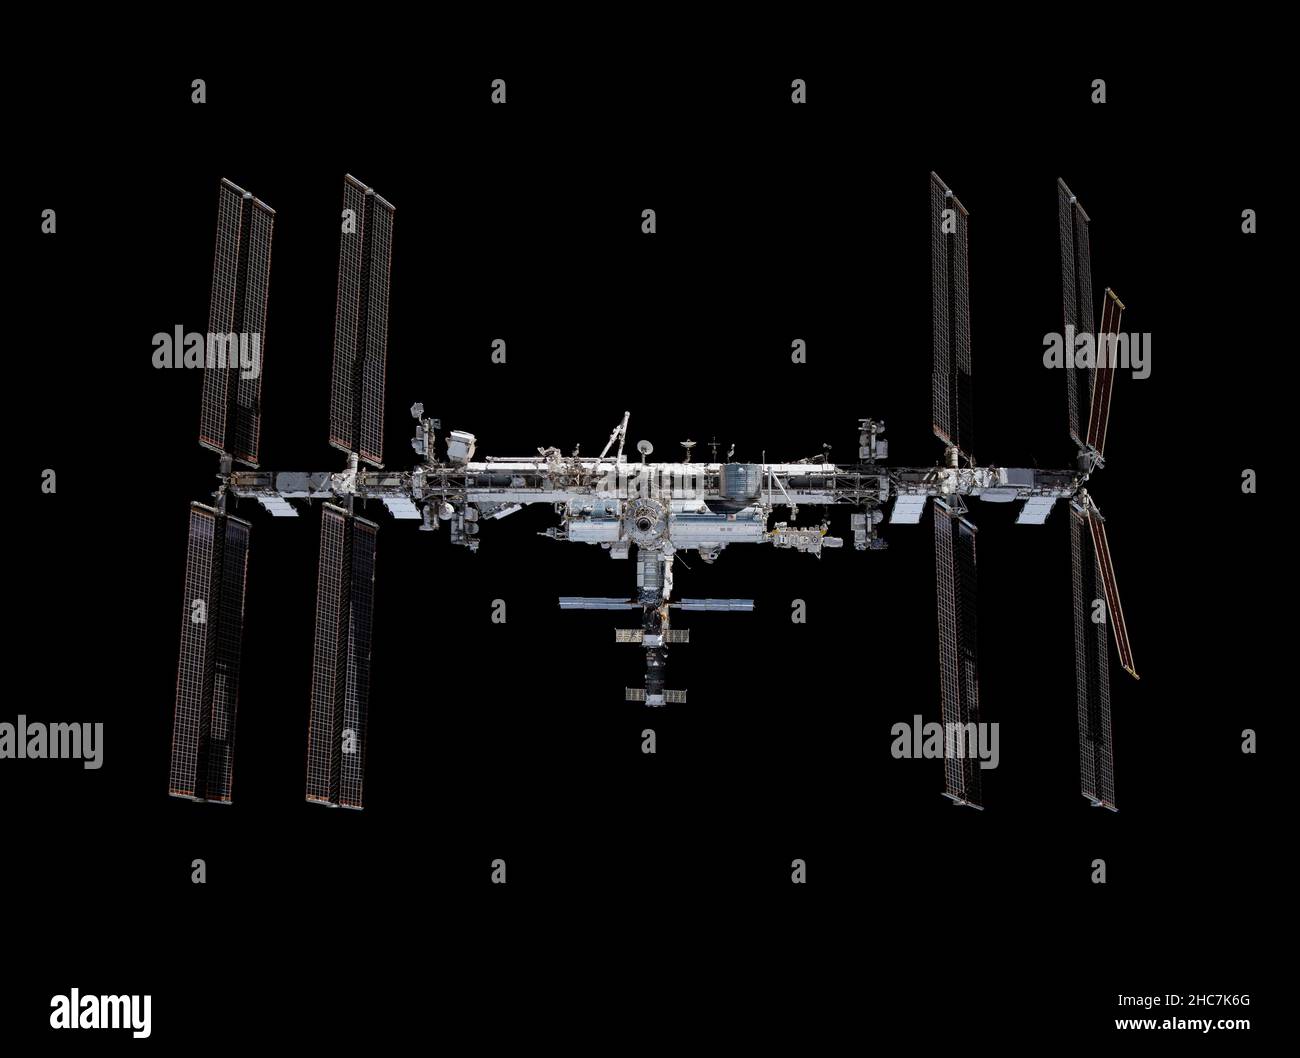 International Space Station, Earth Orbit. 09 December, 2021. The International Space Station seen from the SpaceX Crew Dragon Endeavour spacecraft during a fly-around of the orbiting lab after undocking from the Harmony module space-facing port November 8, 2021 in Earth Orbit. Credit: NASA/NASA/Alamy Live News Stock Photo